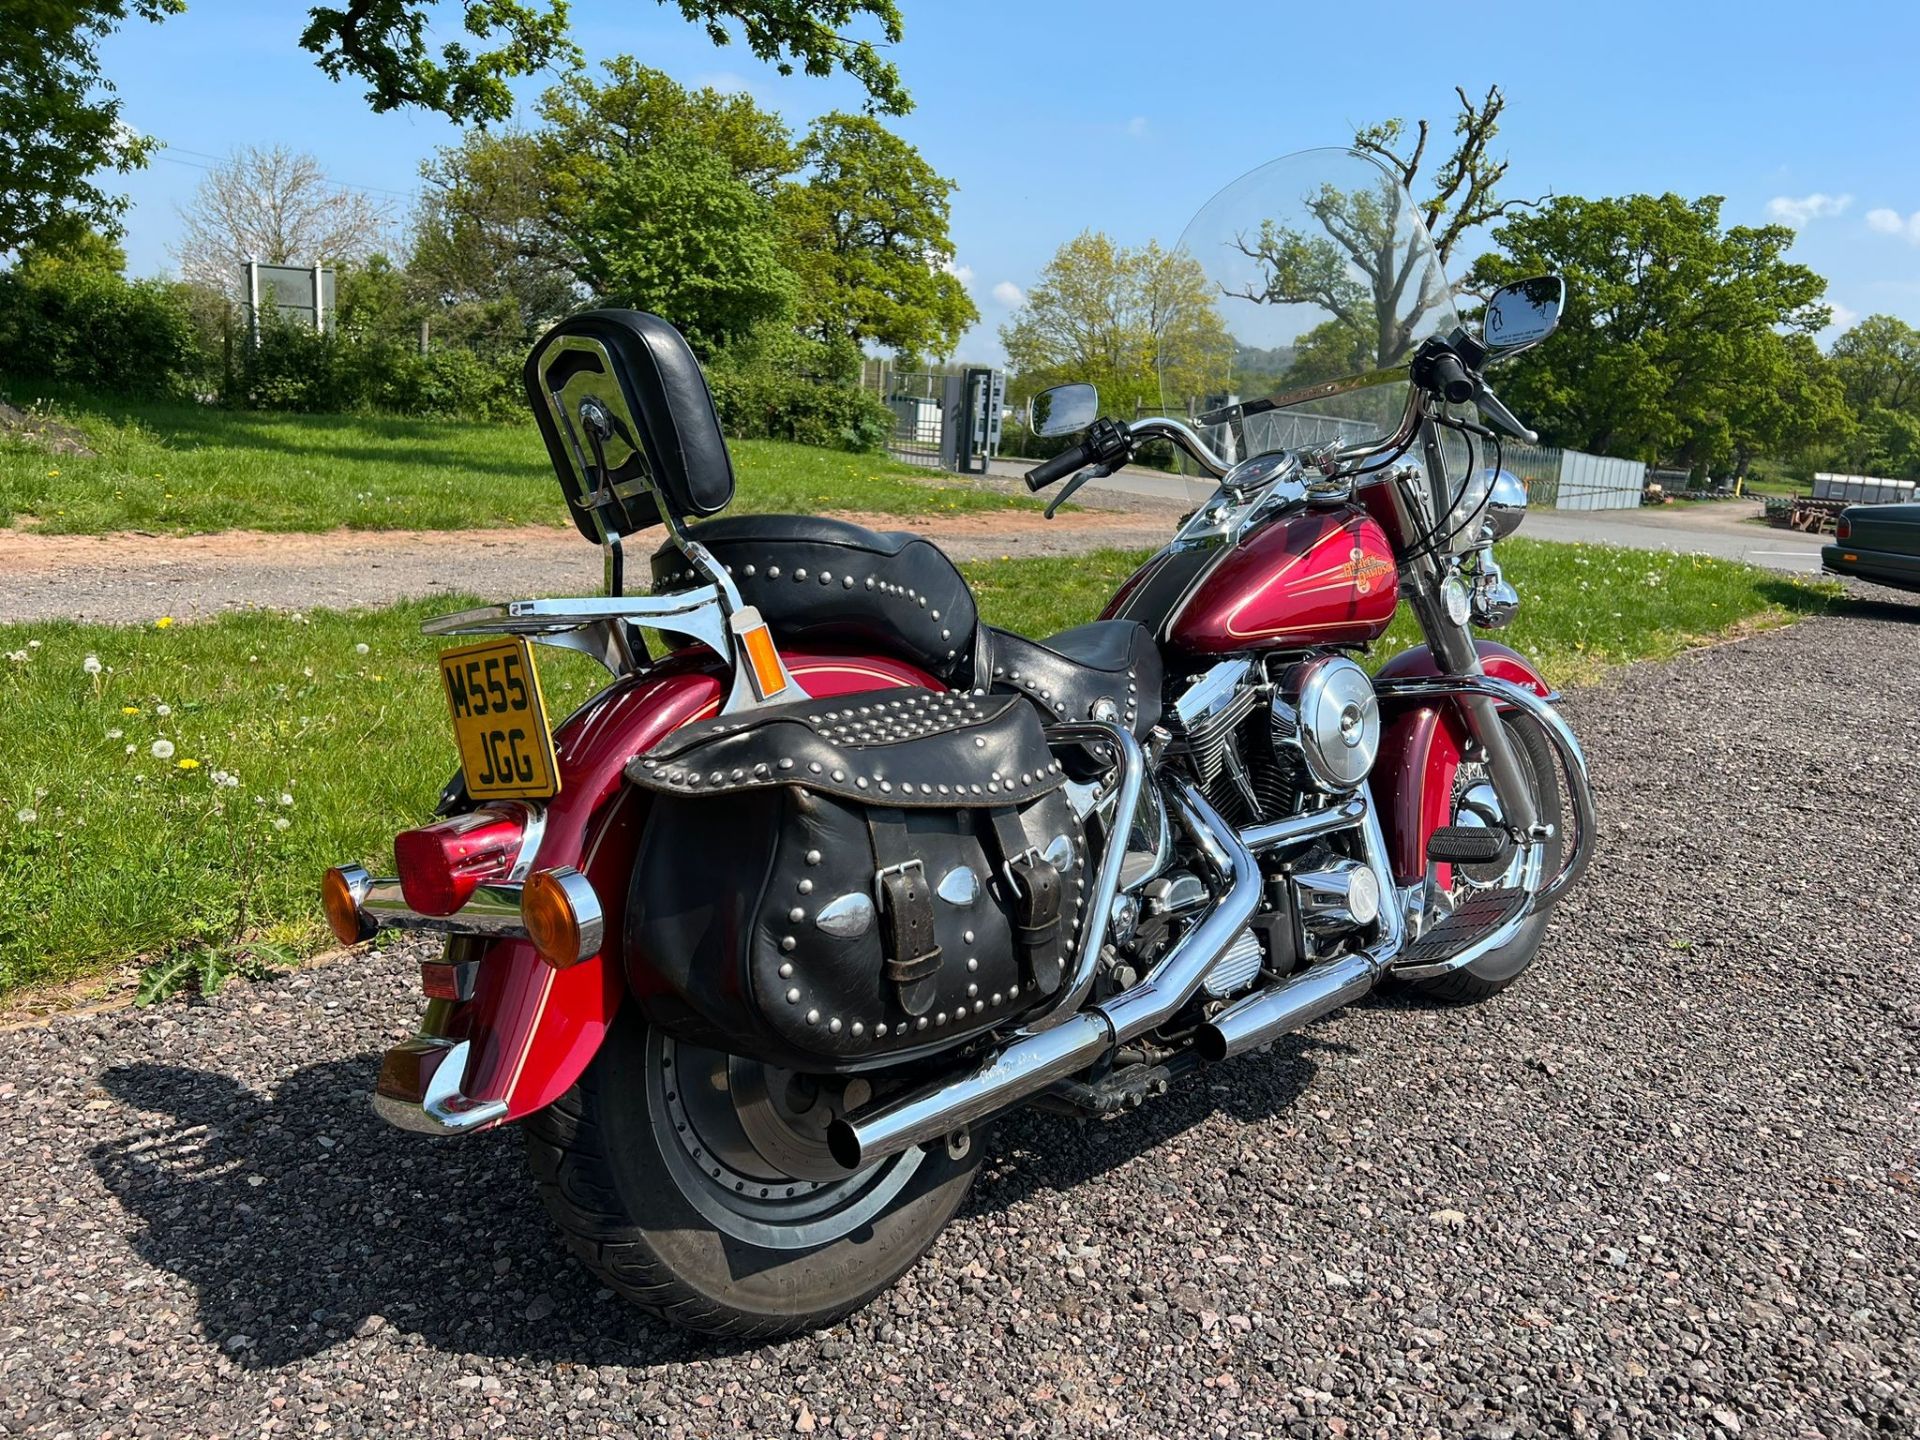 Harley Davidson FLSTC Heritage Softail motorcycle. 1995. 1340cc. Runs and rides well, ridden to - Image 11 of 11